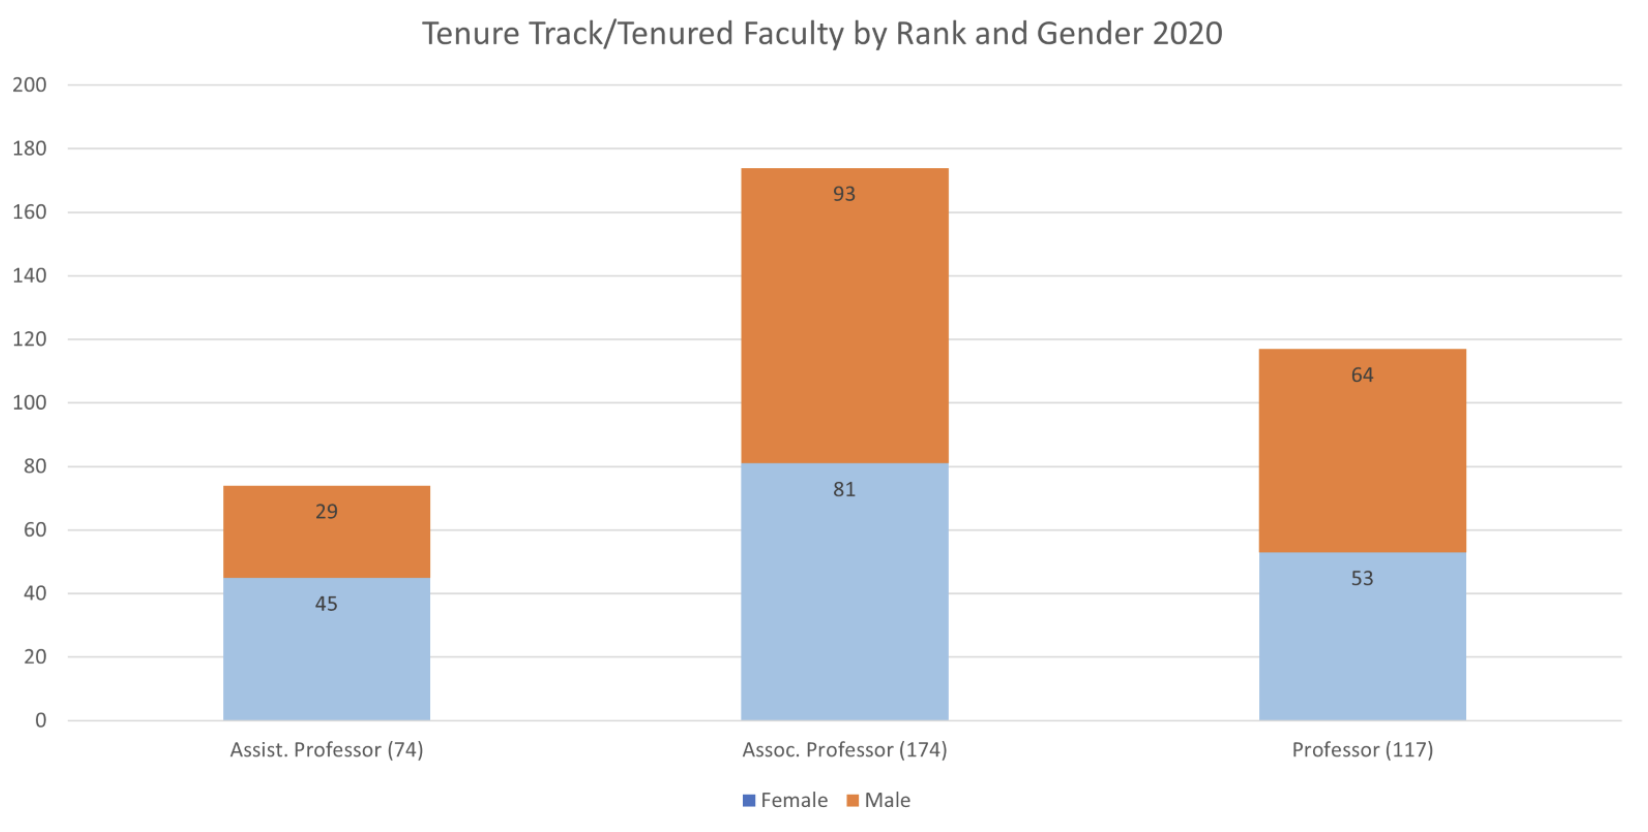 Graph illustrating tenure track/tenured faculty by rank and gender, 2020